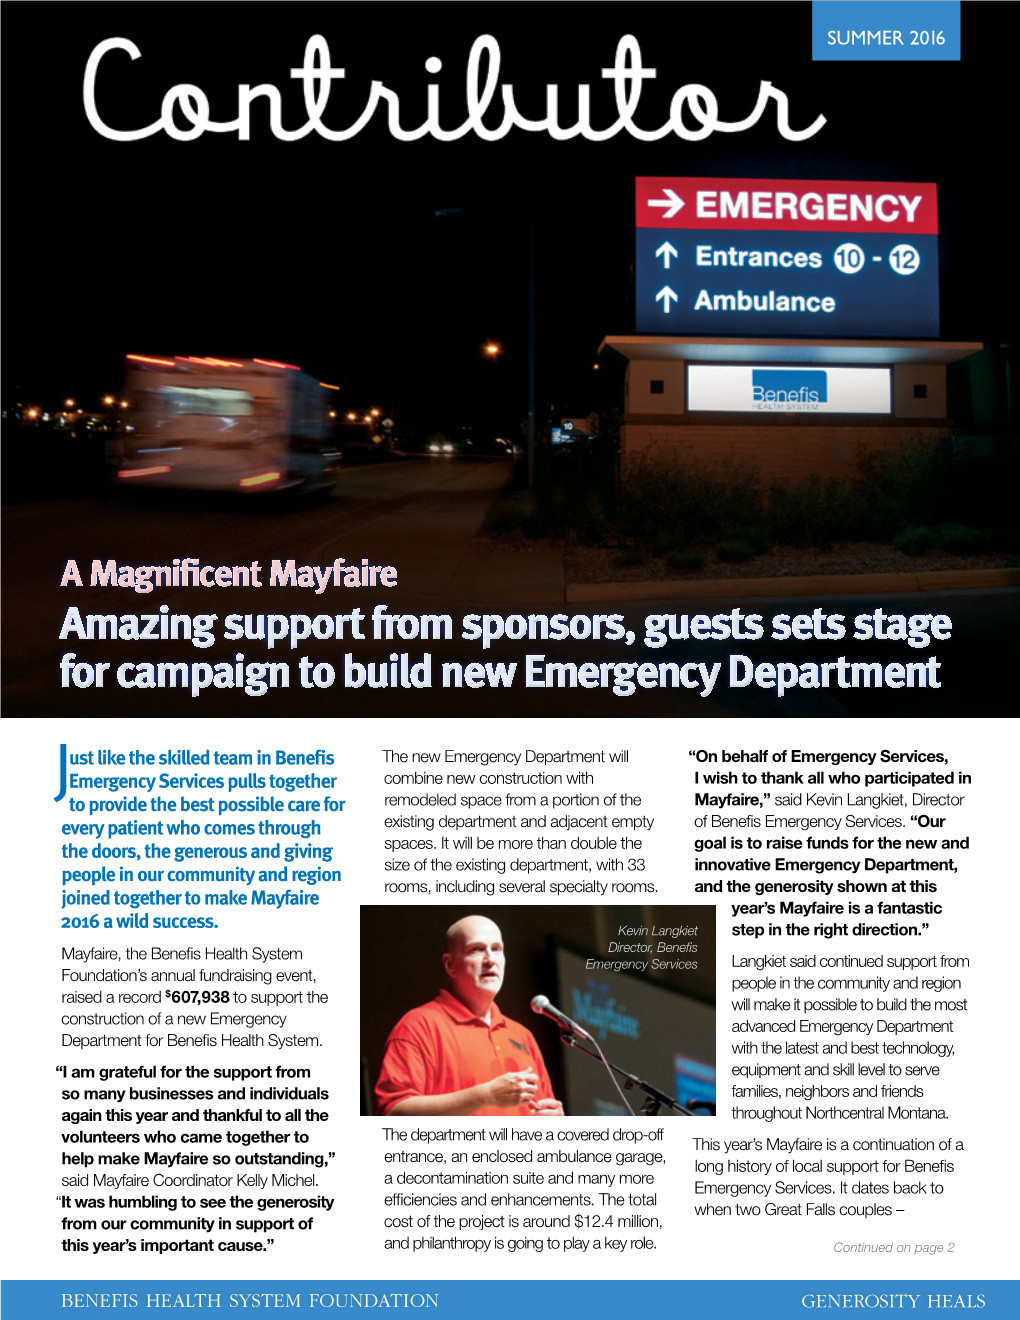 Amazing Support from Sponsors, Guests Sets Stage for Campaign to Build New Emergency Department